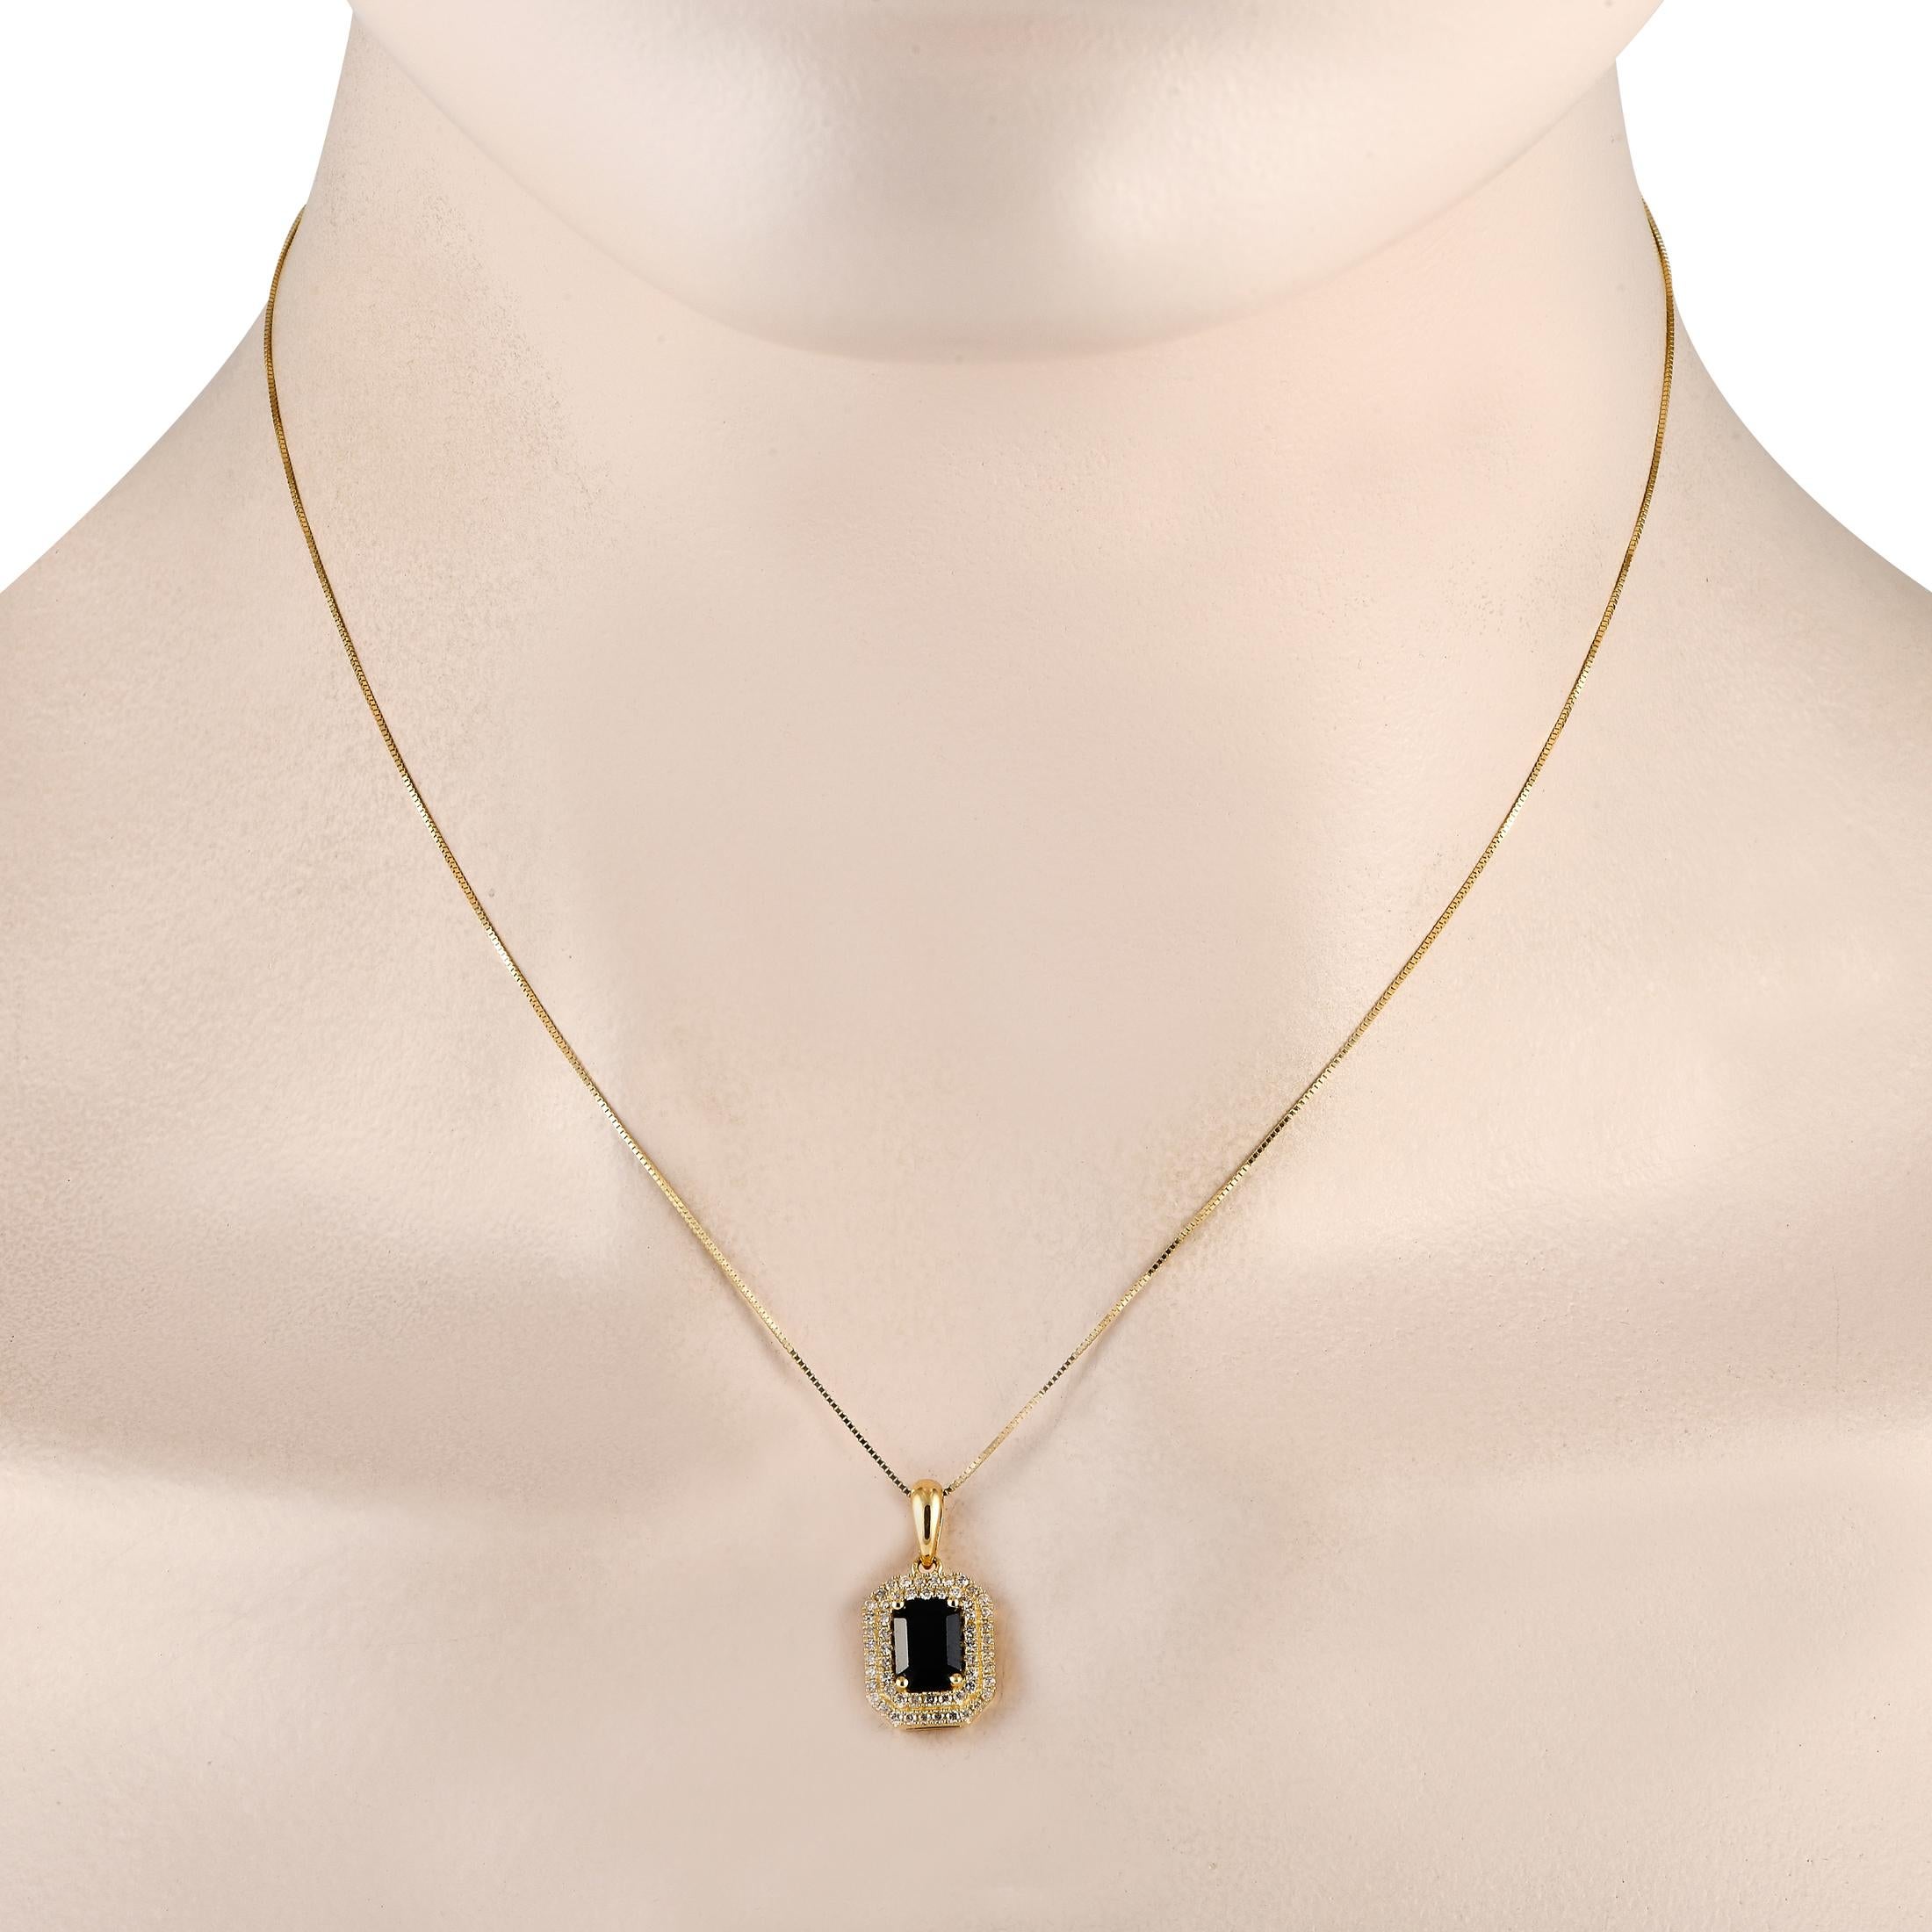 Make a statement by adding this impeccably crafted necklace to any ensemble. Breathtaking and elegant, this necklace features a 14K Yellow Gold pendant measuring 0.75 long by 0.45 wide. It comes to life thanks to a striking Sapphire center stone and